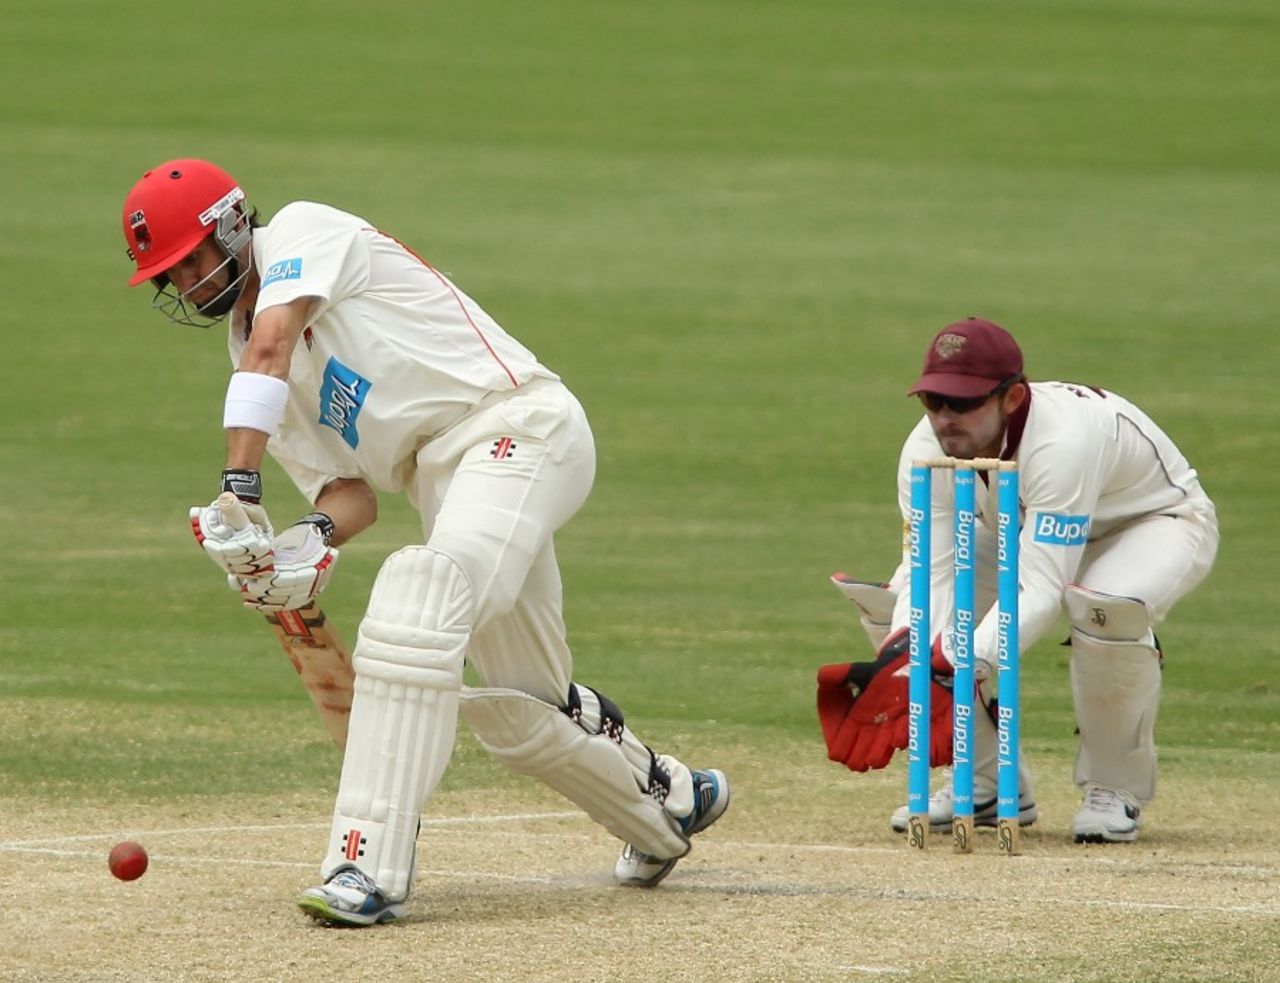 Callum Ferguson pushes one back down the pitch, South Australia v Queensland, Sheffield Shield, Adelaide, 2nd day, October 24, 2012